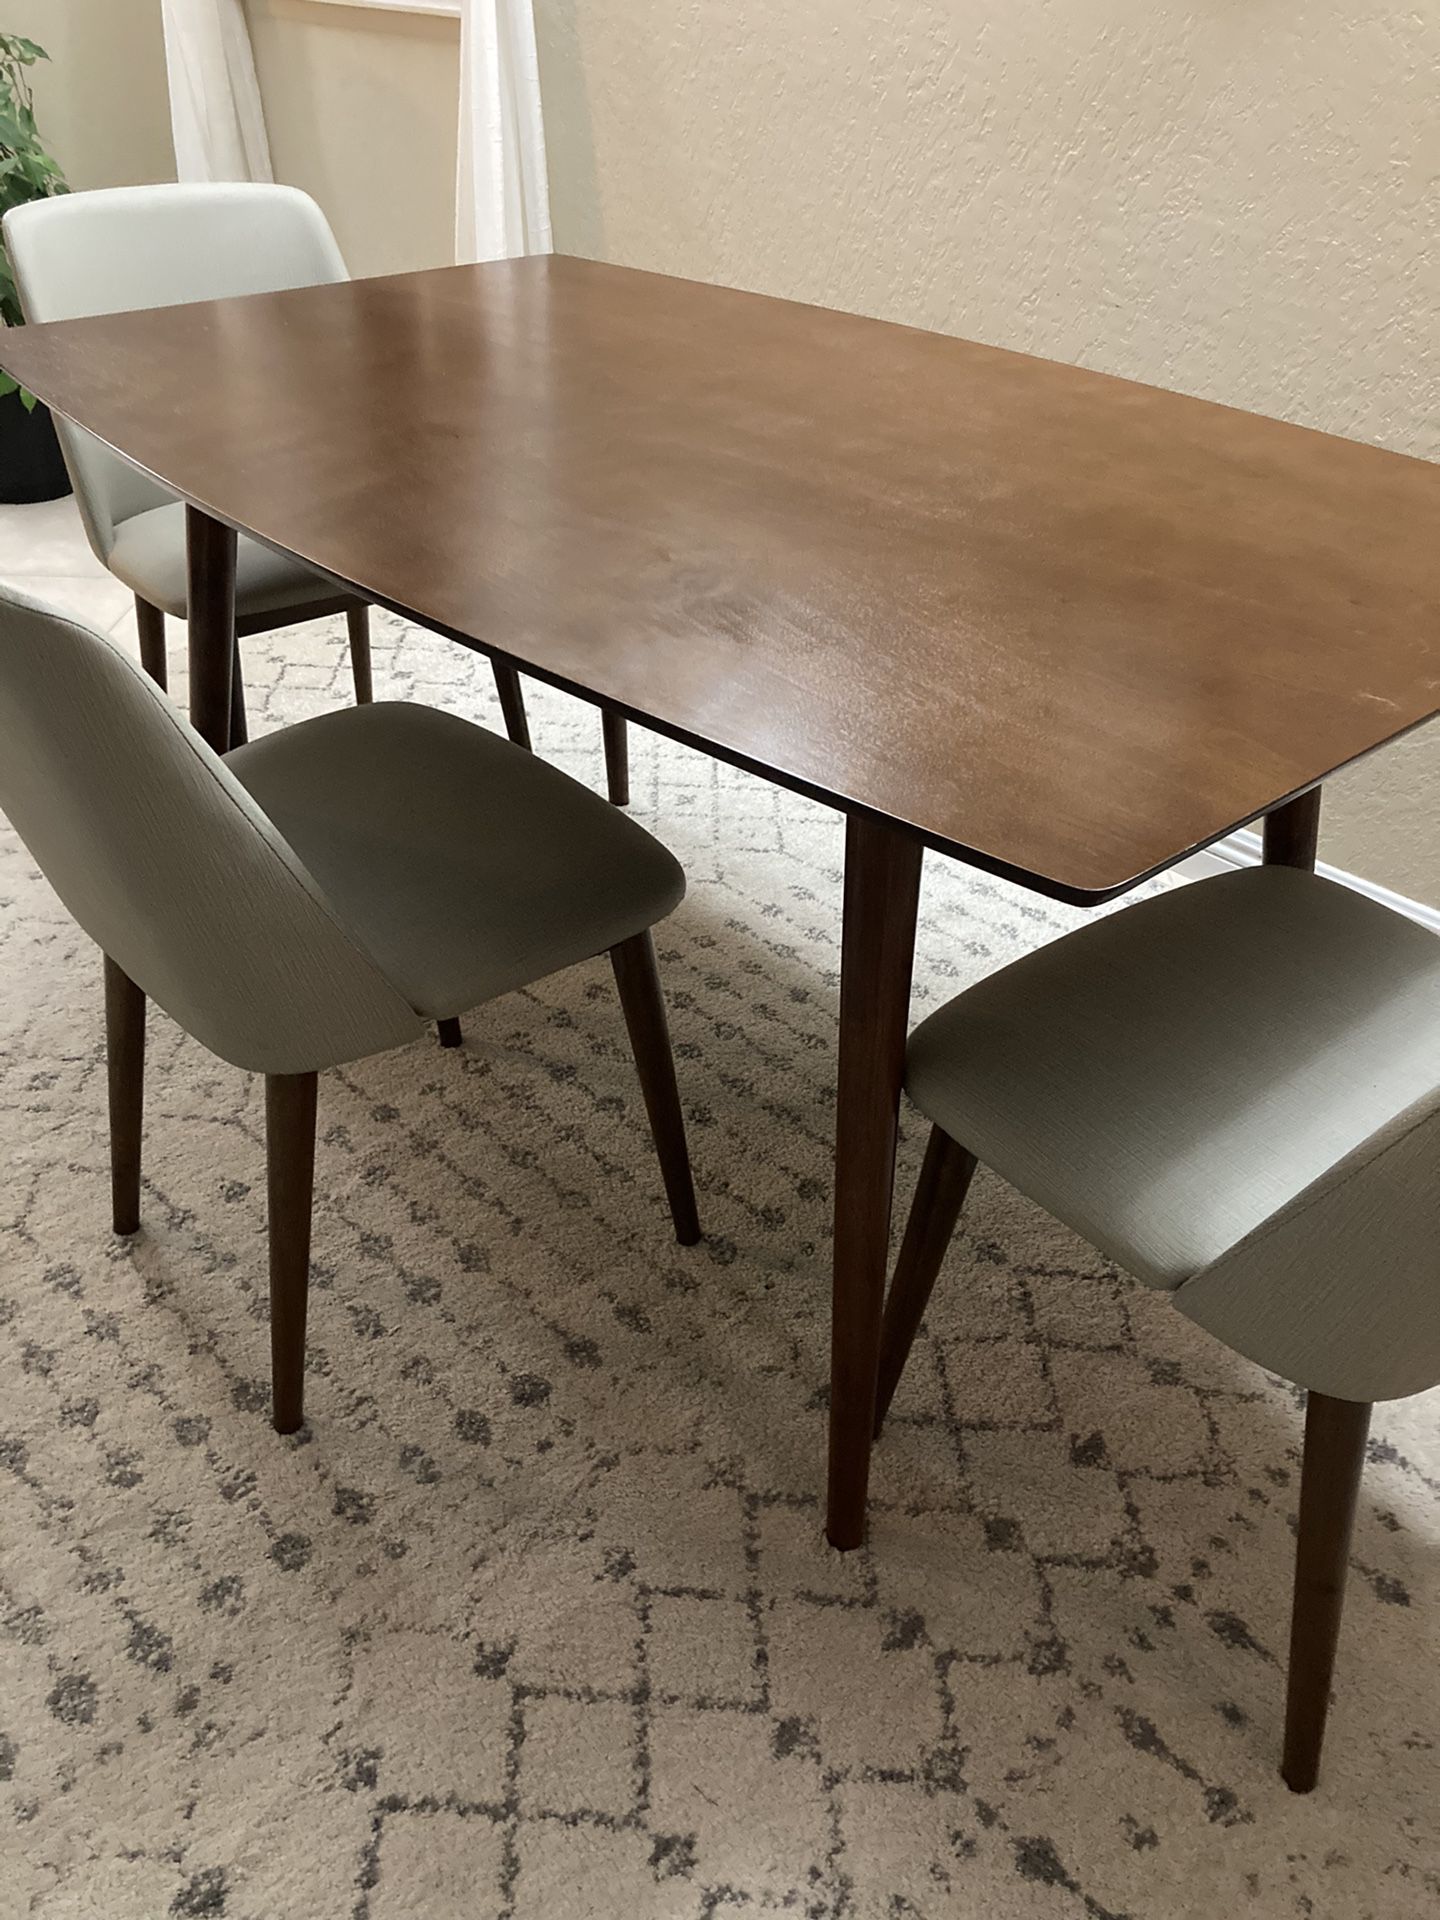 Midcentury Modern Dining Table